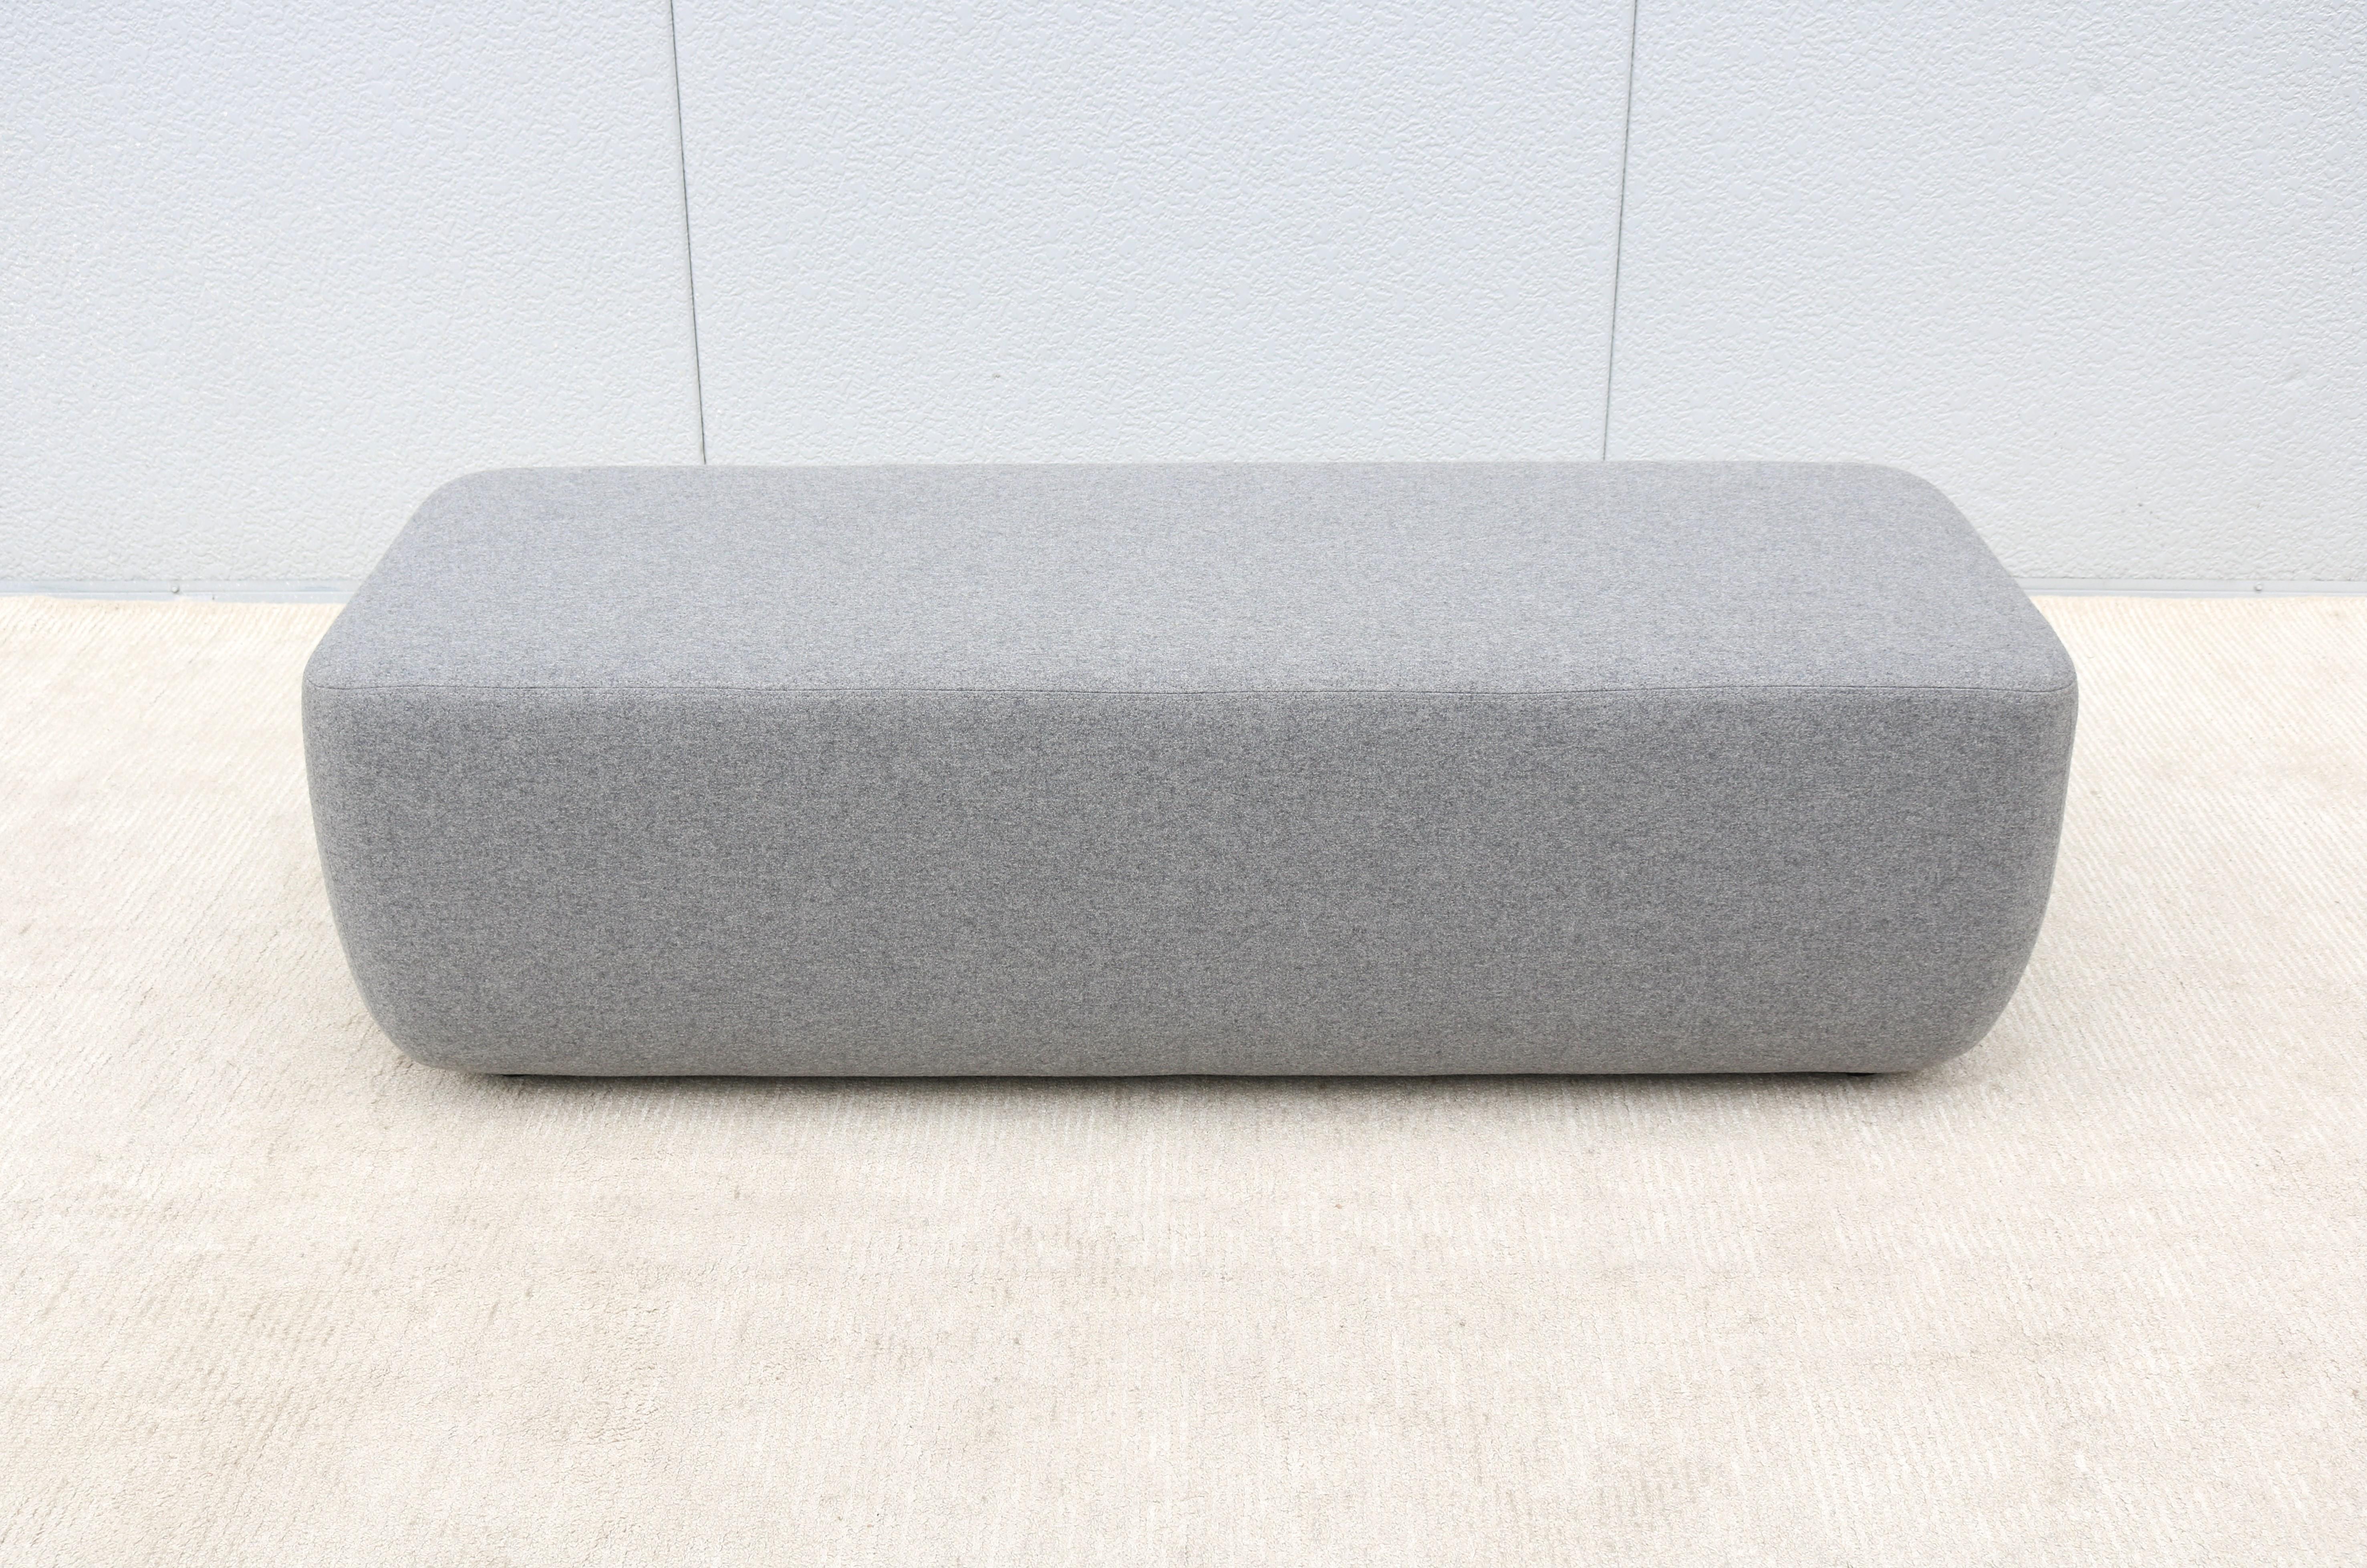 This fabulous Opera pouf designed by Busk+Hertzog for Softline features a clean, tight look, and is soft and very comfortable.
All the corners are invitingly rounded and highlight the modern and appealing design.
This elegant looking pouf speaks a